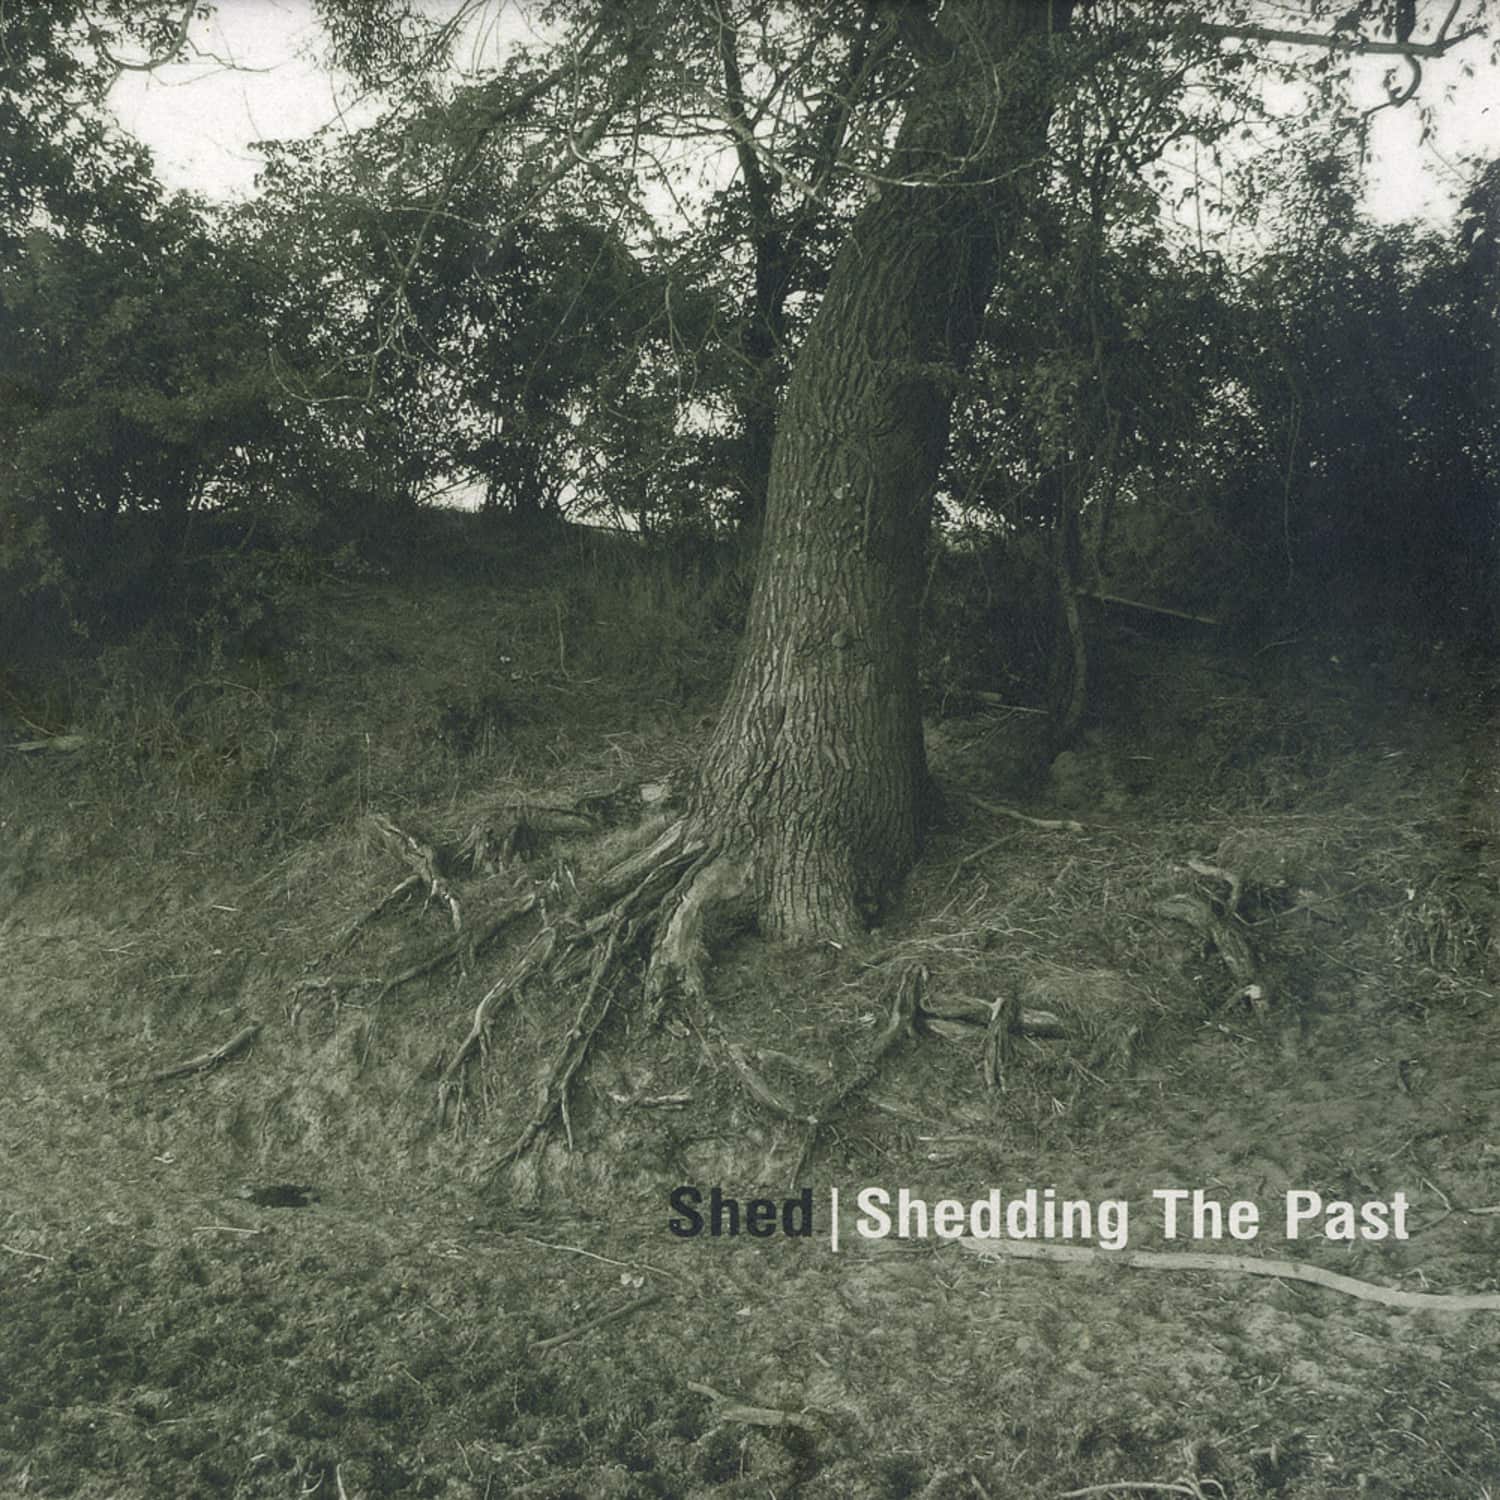 Shed - SHEDDING THE PAST 